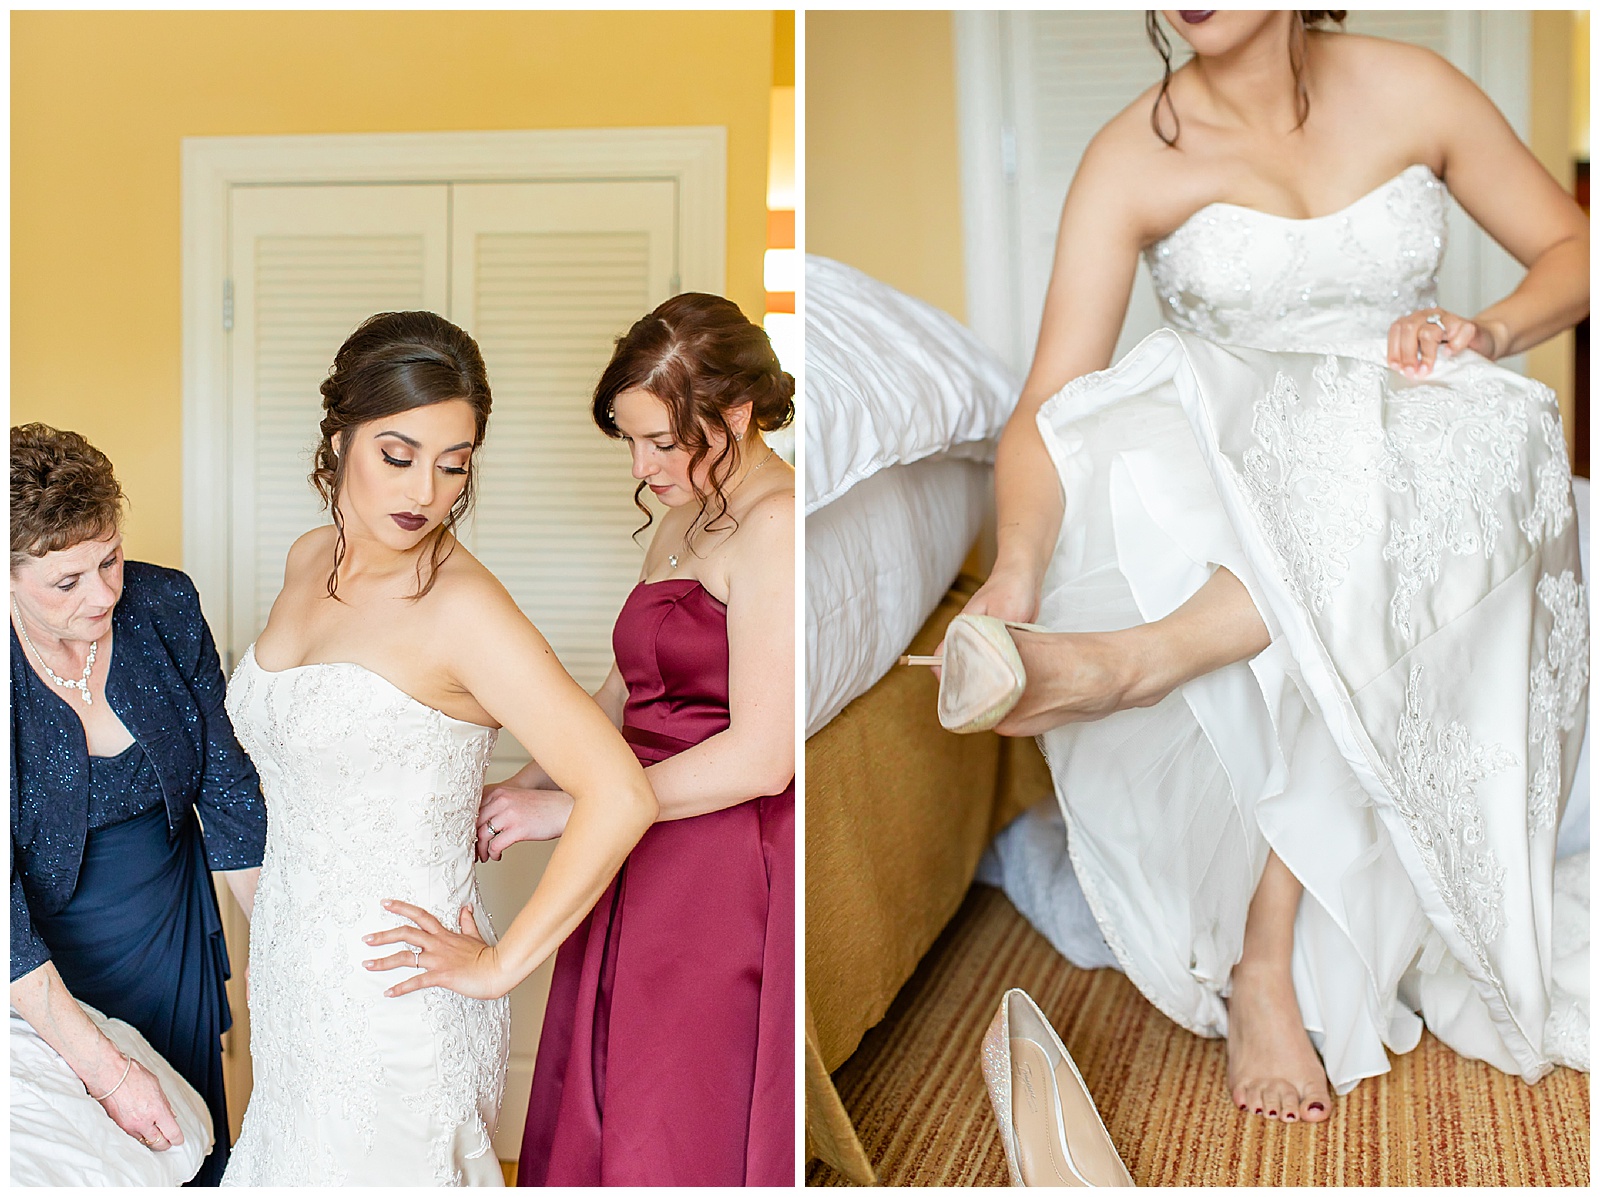 A mother and sister zipping up the bride's dress in a hotel room in Pittsburgh